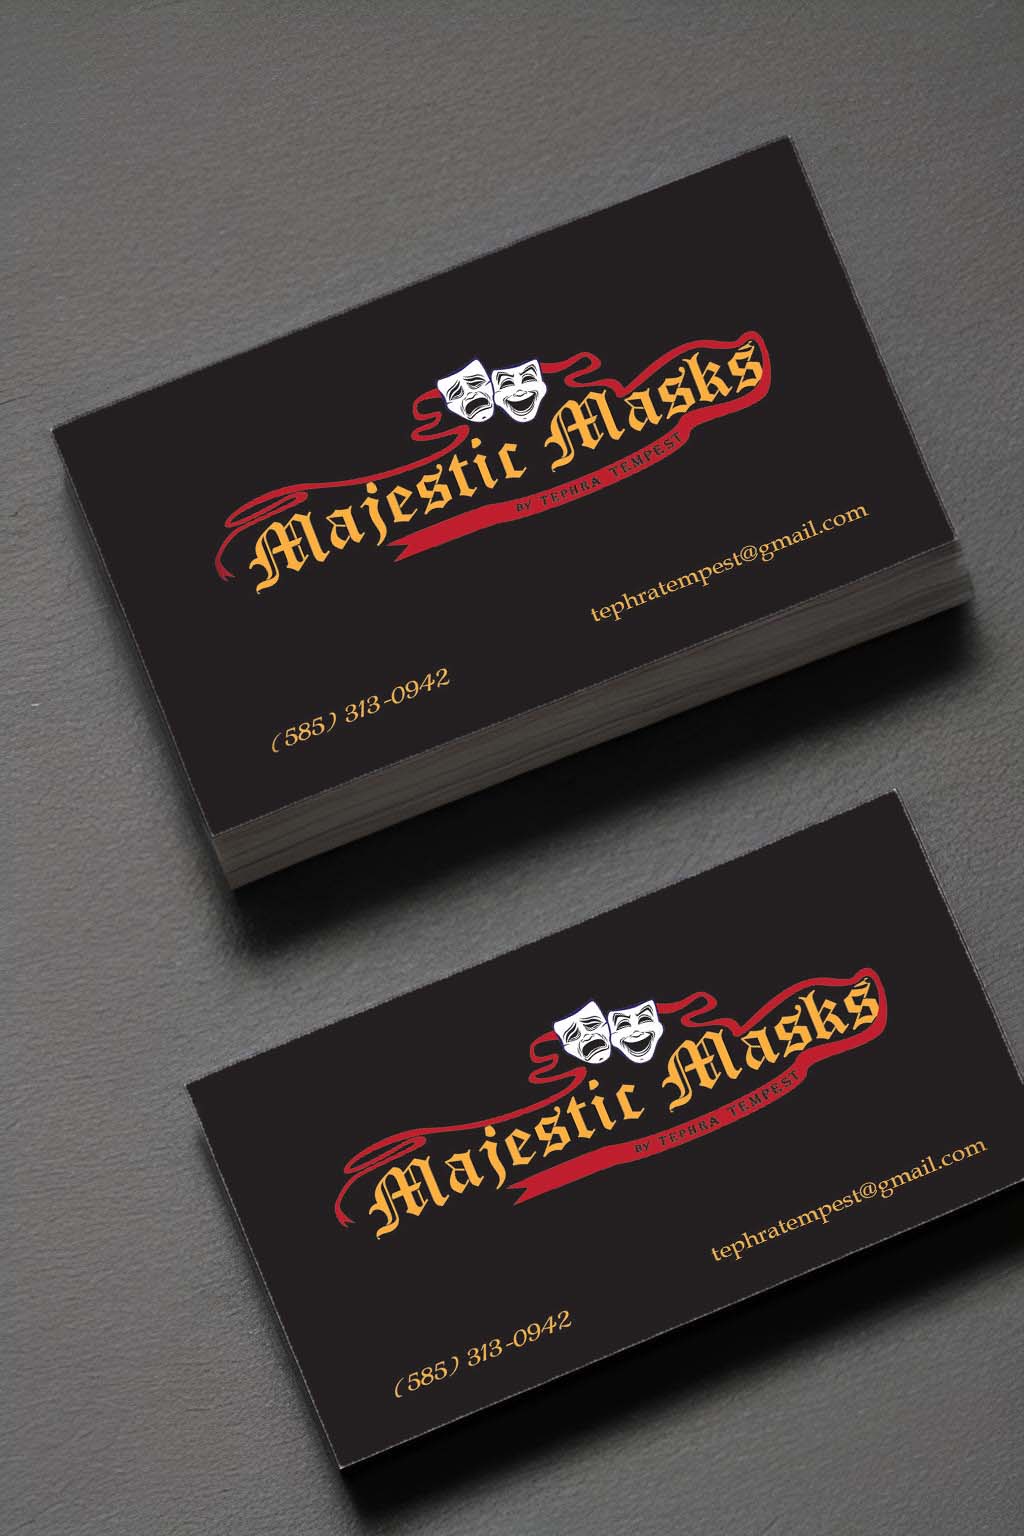 Image of a deck of black business cards with the logo for Majestic Masks, and business information on them.